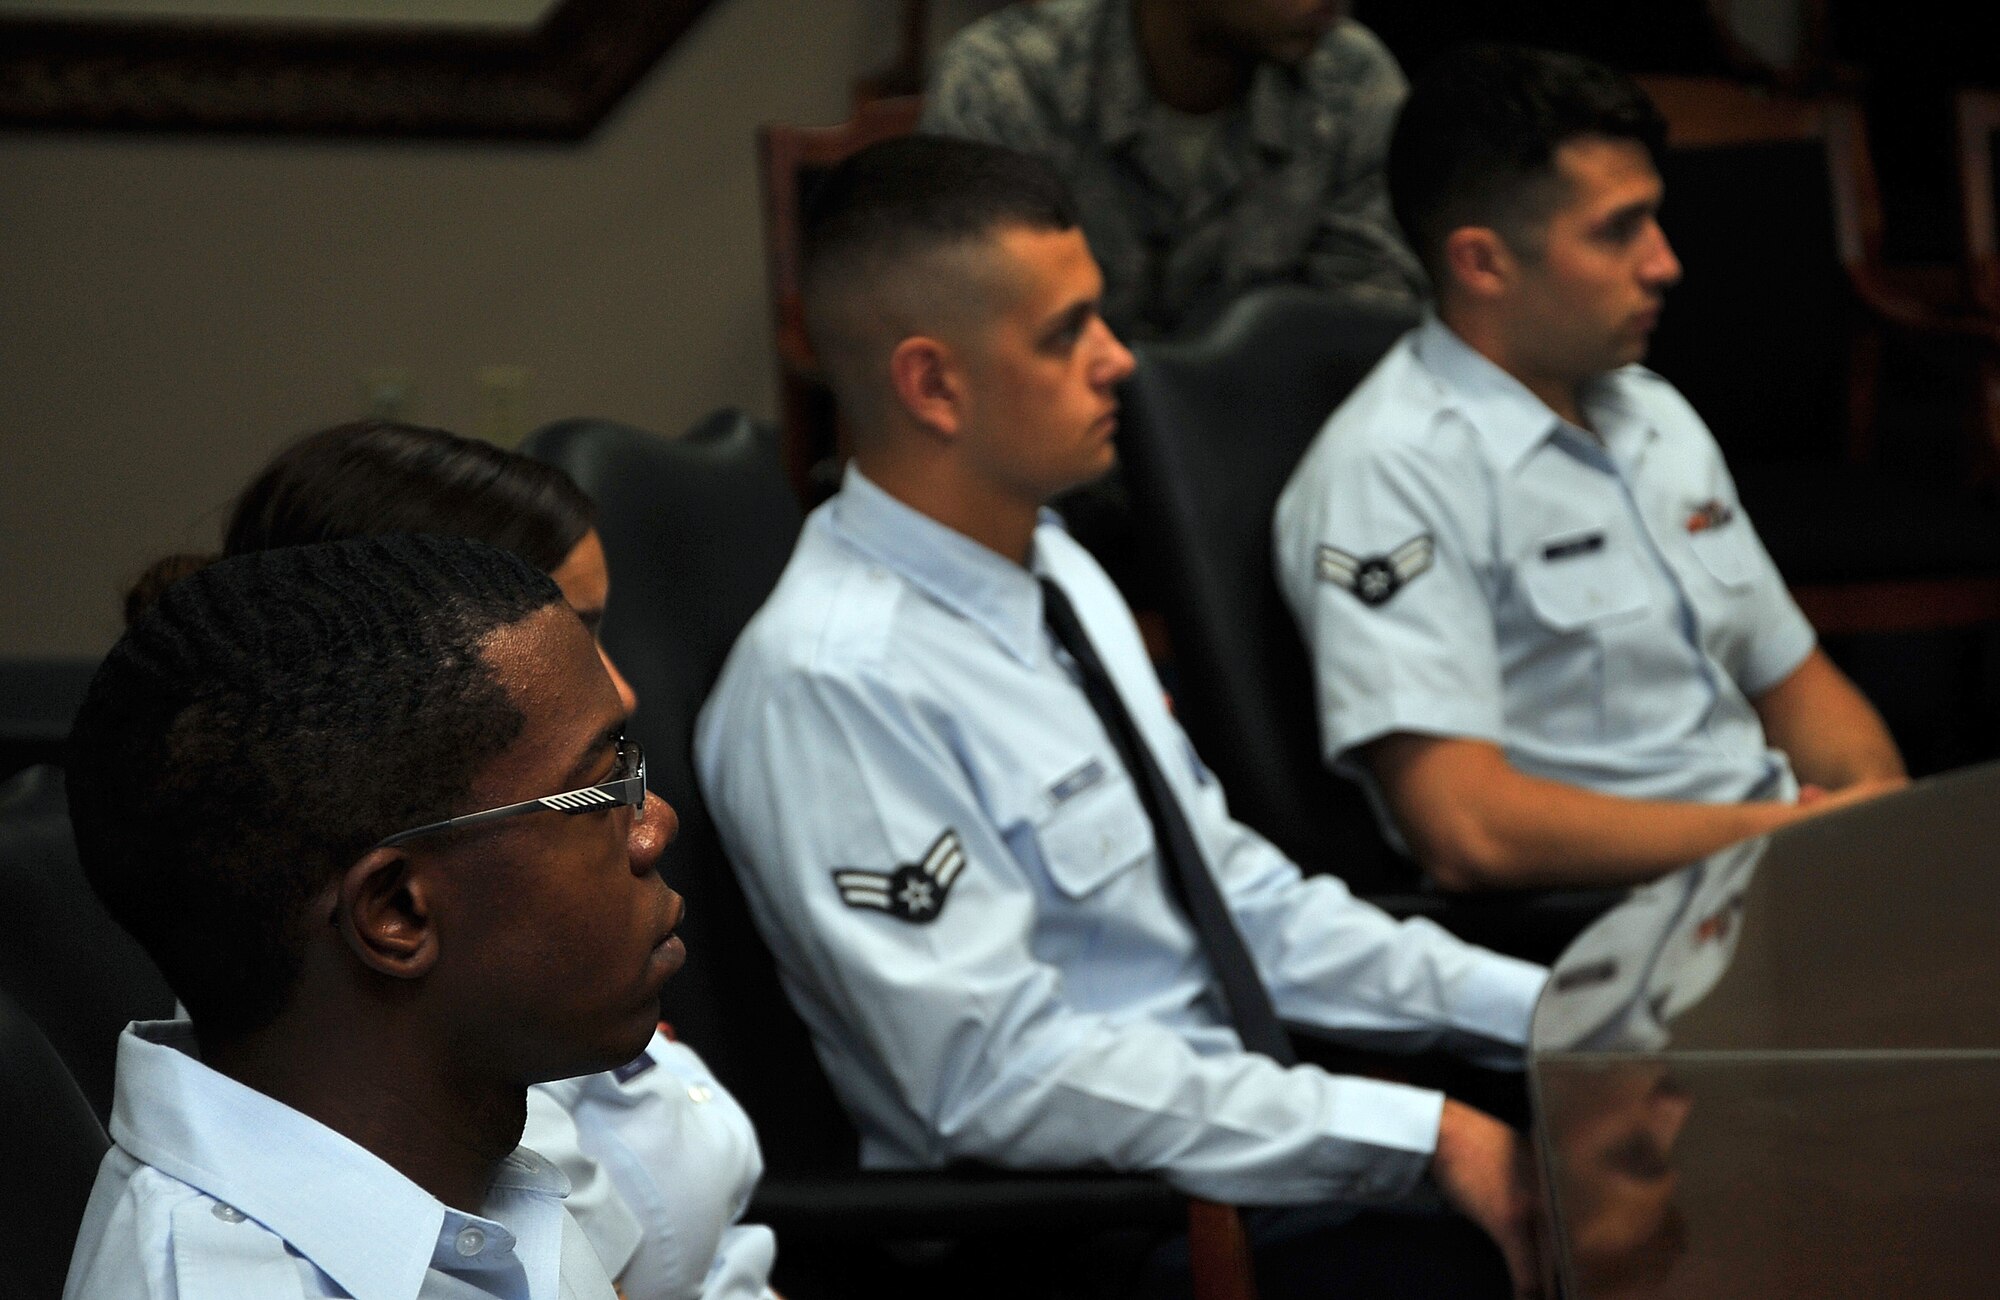 Airmen listen to Brig. Gen. Andrew Toth, 36th Wing commander, provide a mission brief Feb. 9, 2015, at Andersen Air Force Base, Guam, as part of an introduction to the First Term Airmen Center. The FTAC program at Andersen is used as a transition period to get Airmen acclimated to living in a new environment, to learn about the 36th Wing mission, career advancements and give them a chance to communicate with base leadership and be handed the tools for a successful Air Force career. (U.S. Air force photo by Staff Sgt. Melissa B. White/Released)